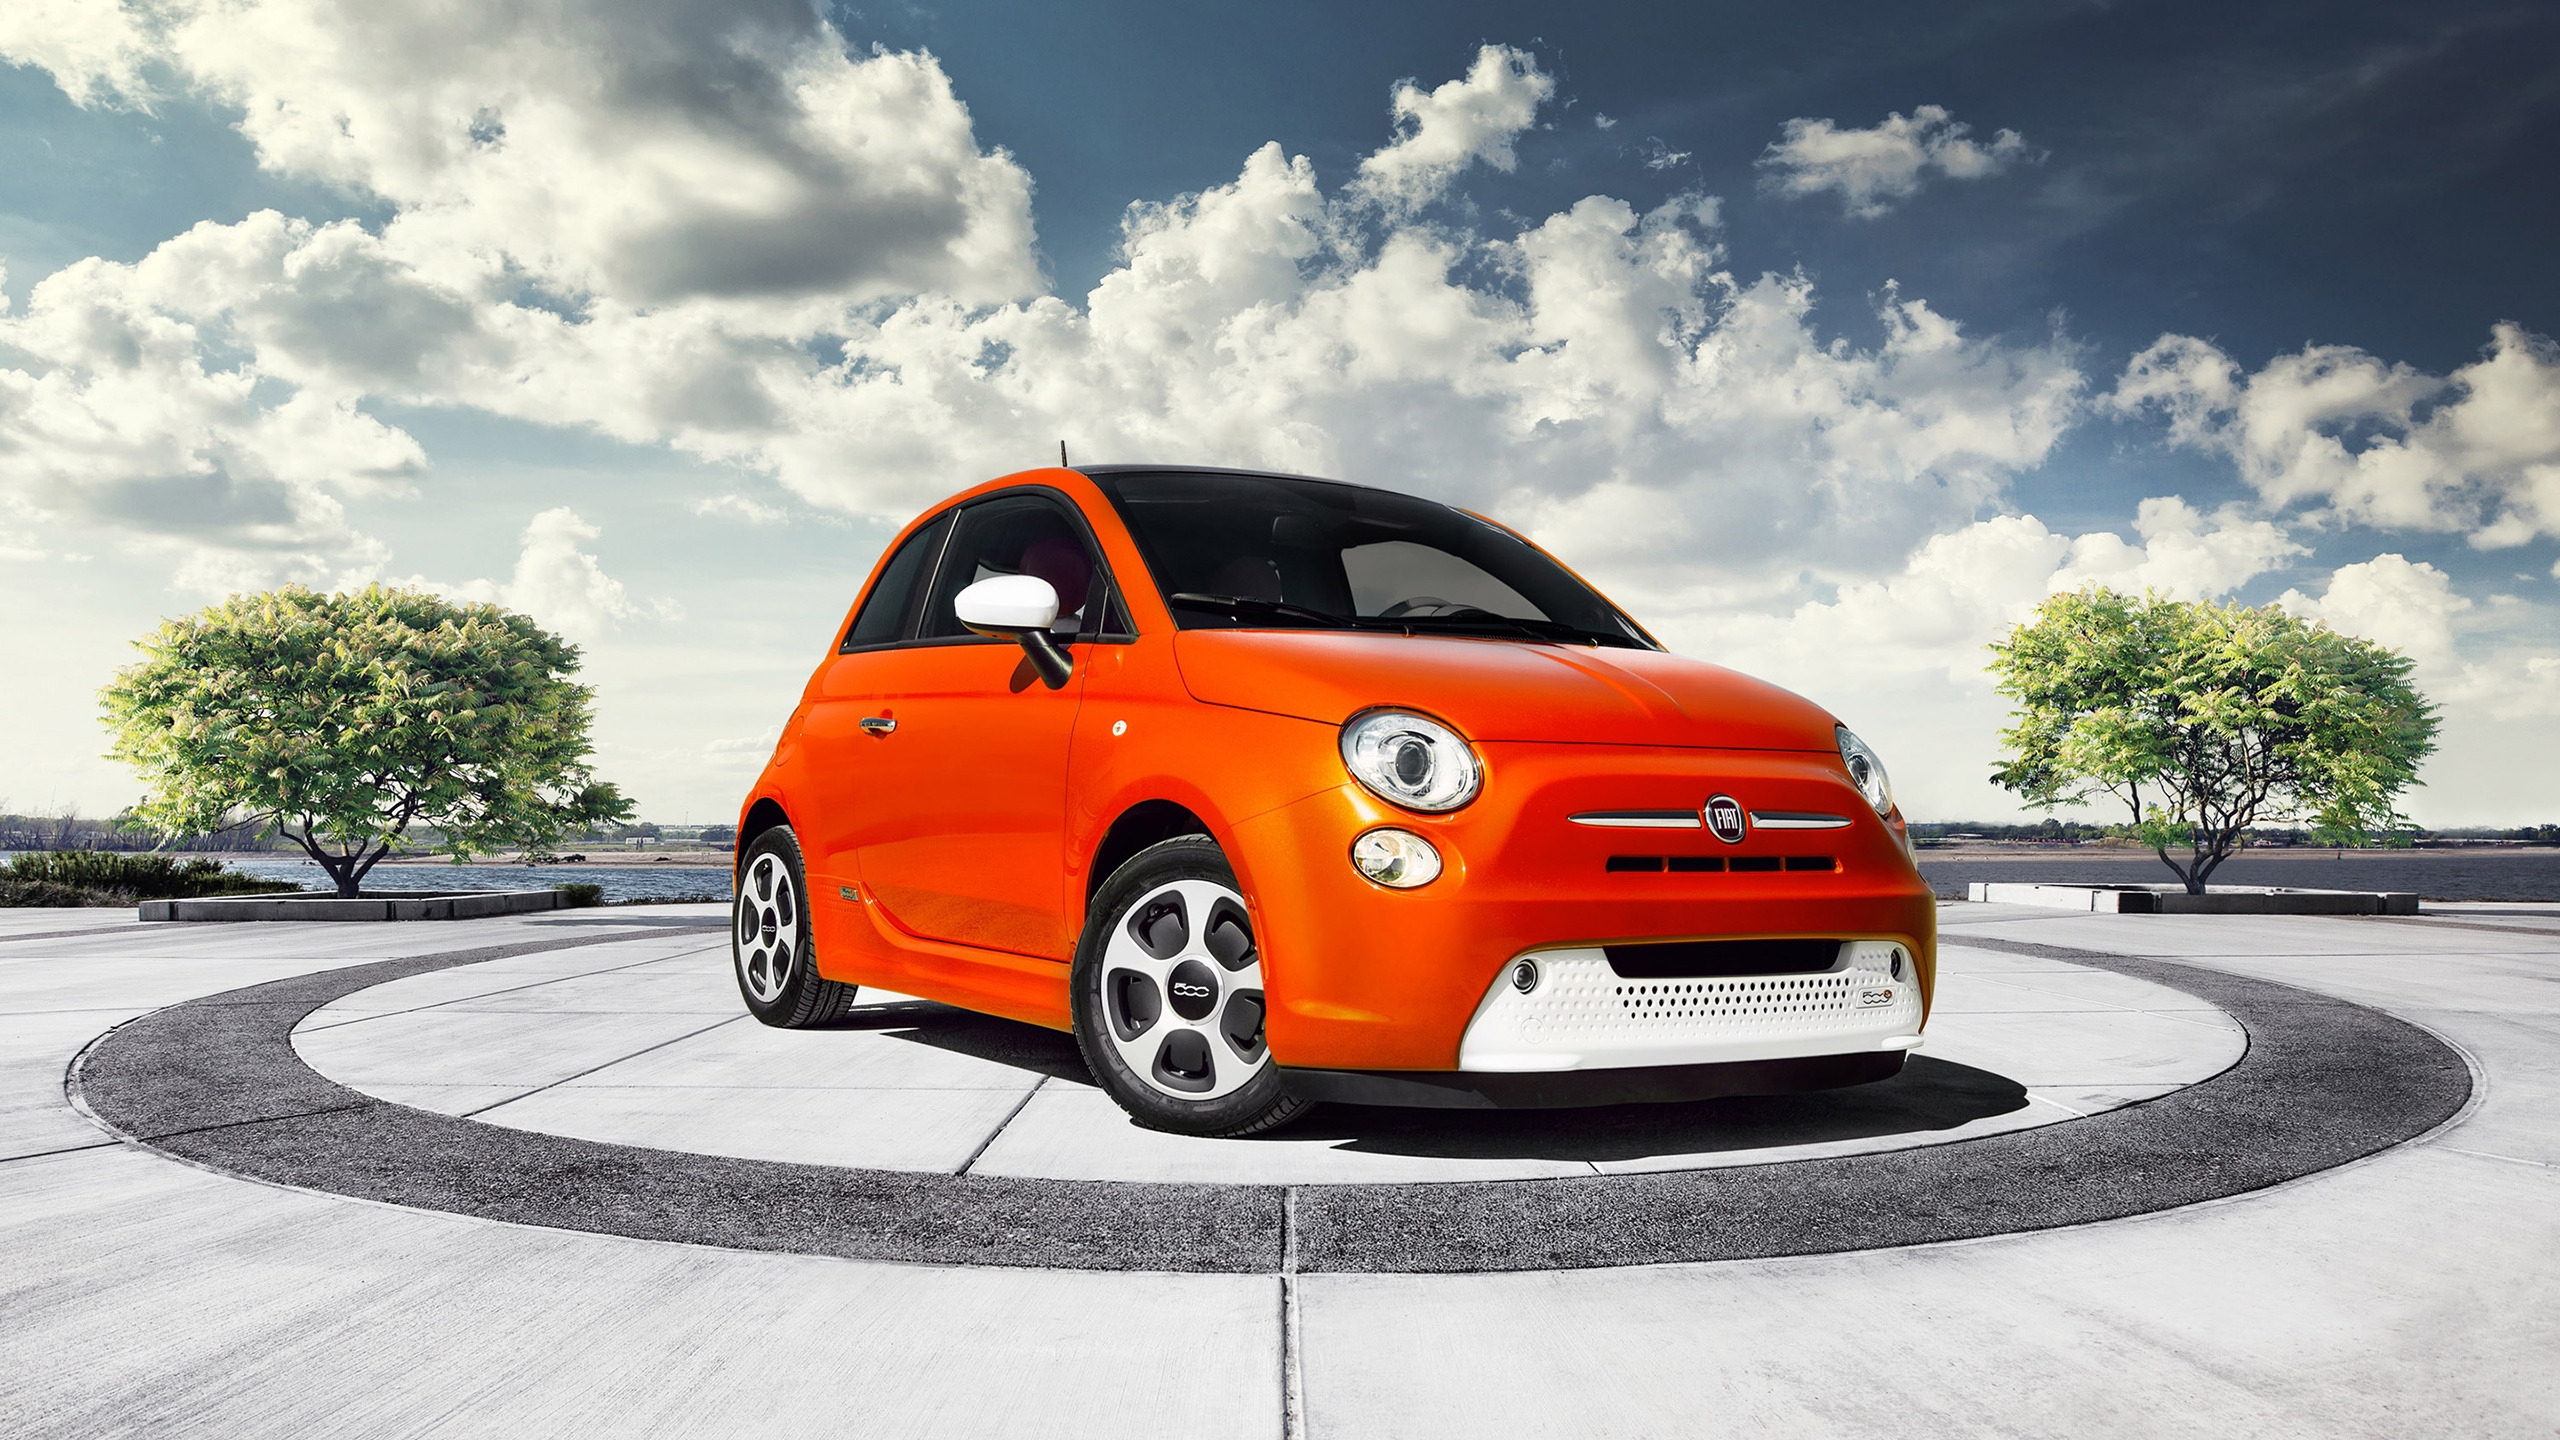 Fiat 500 2013 Edition for 2560x1440 HDTV resolution